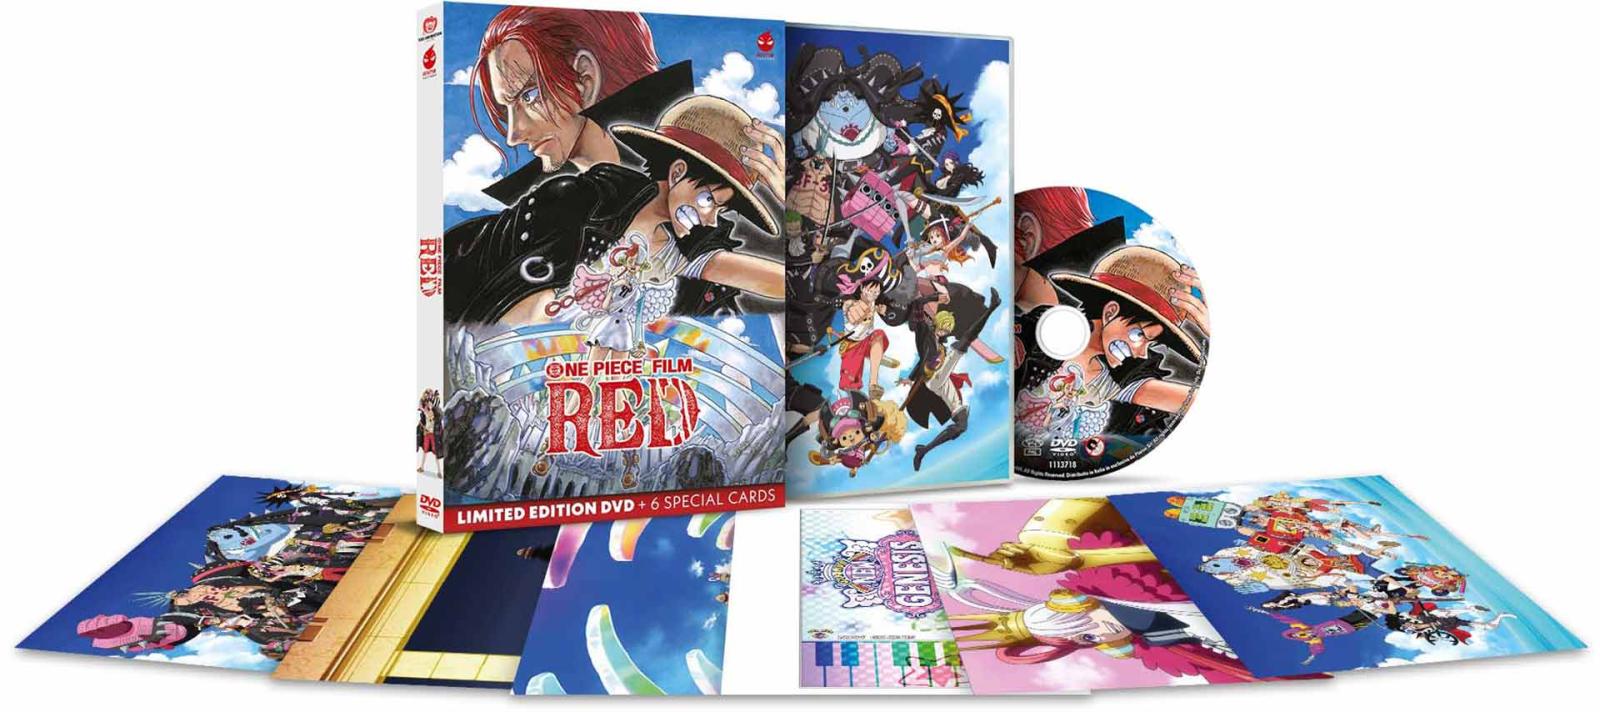 One Piece Film: RED - Limited Edition DVD + 6 Special Cards (DVD) Image 3